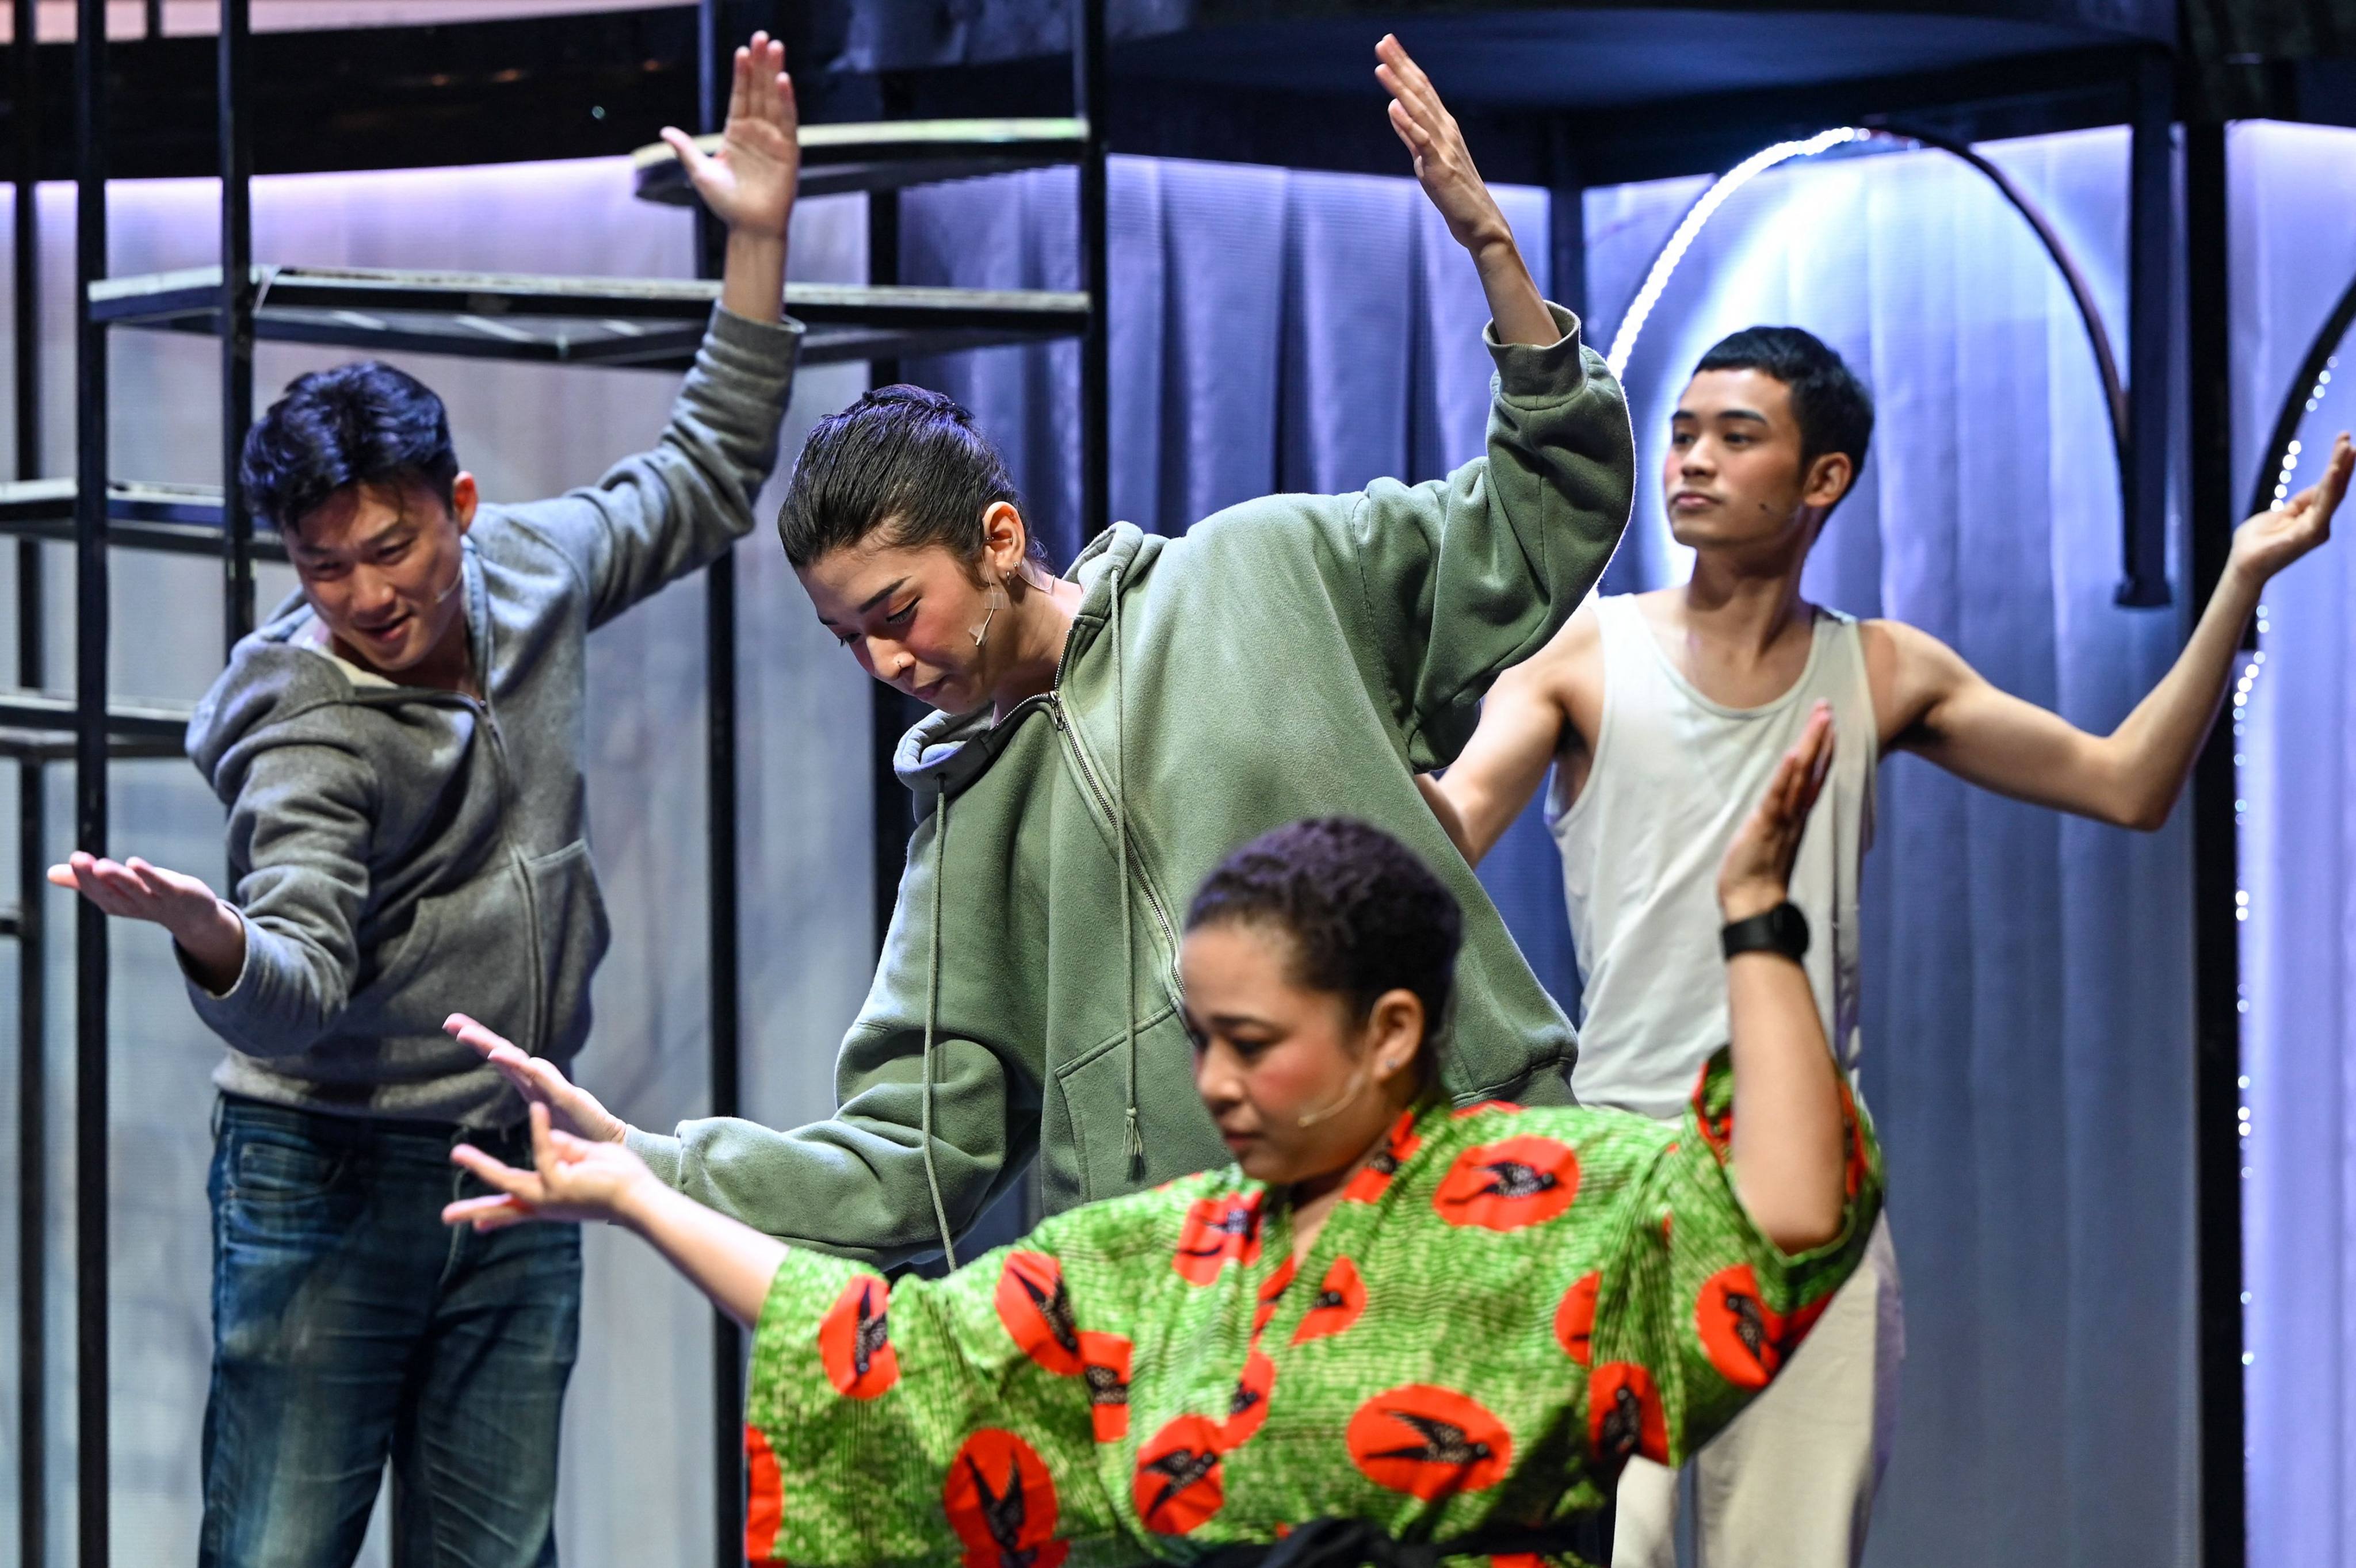 Loo (centre) warms up with other actors during a rehearsal before their performance at a theatre in Singapore last year. Photo: AFP